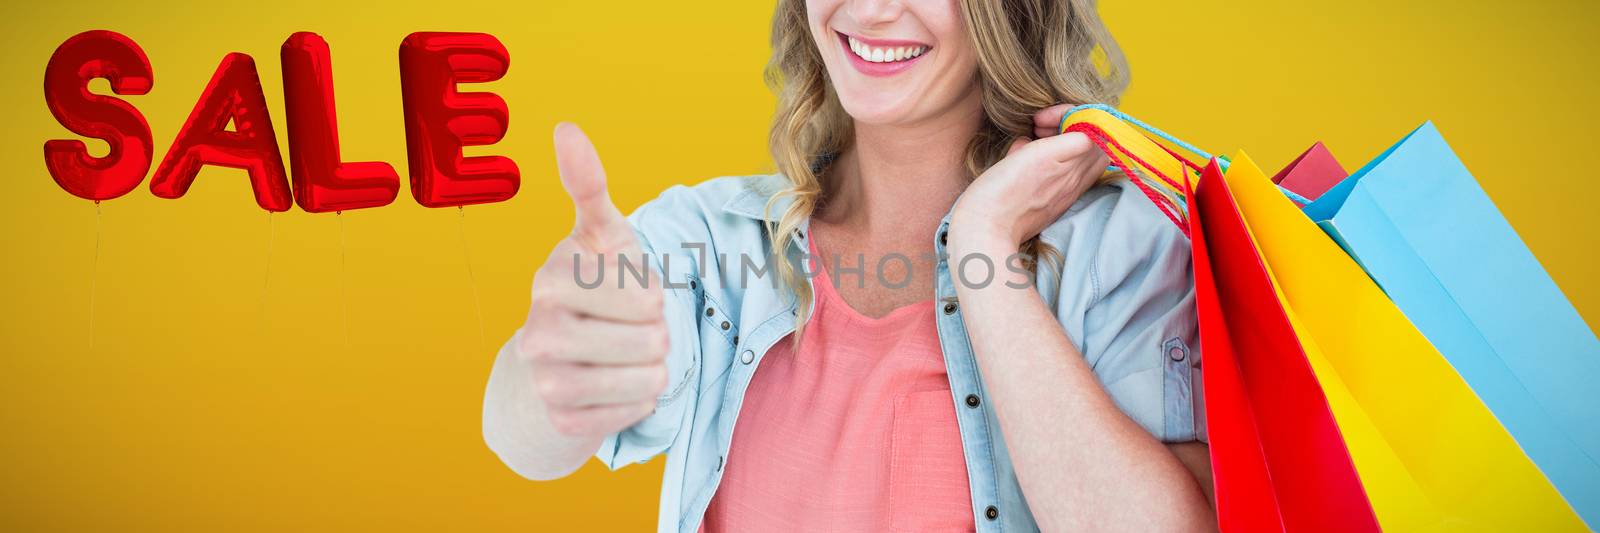 Composite image of woman holding some shopping bags by Wavebreakmedia